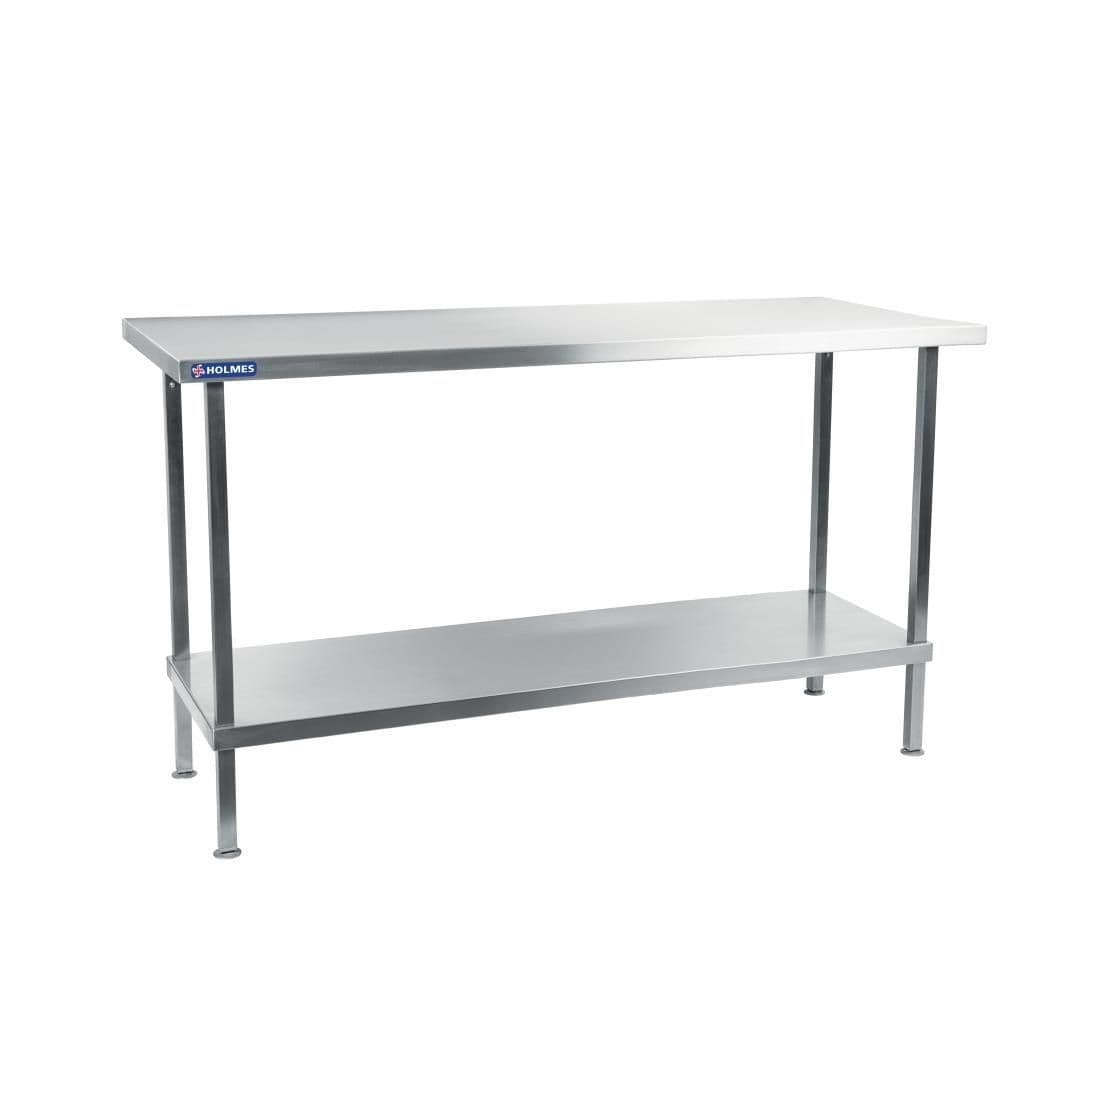 DR051 Holmes Stainless Steel Centre Table 1500mm JD Catering Equipment Solutions Ltd